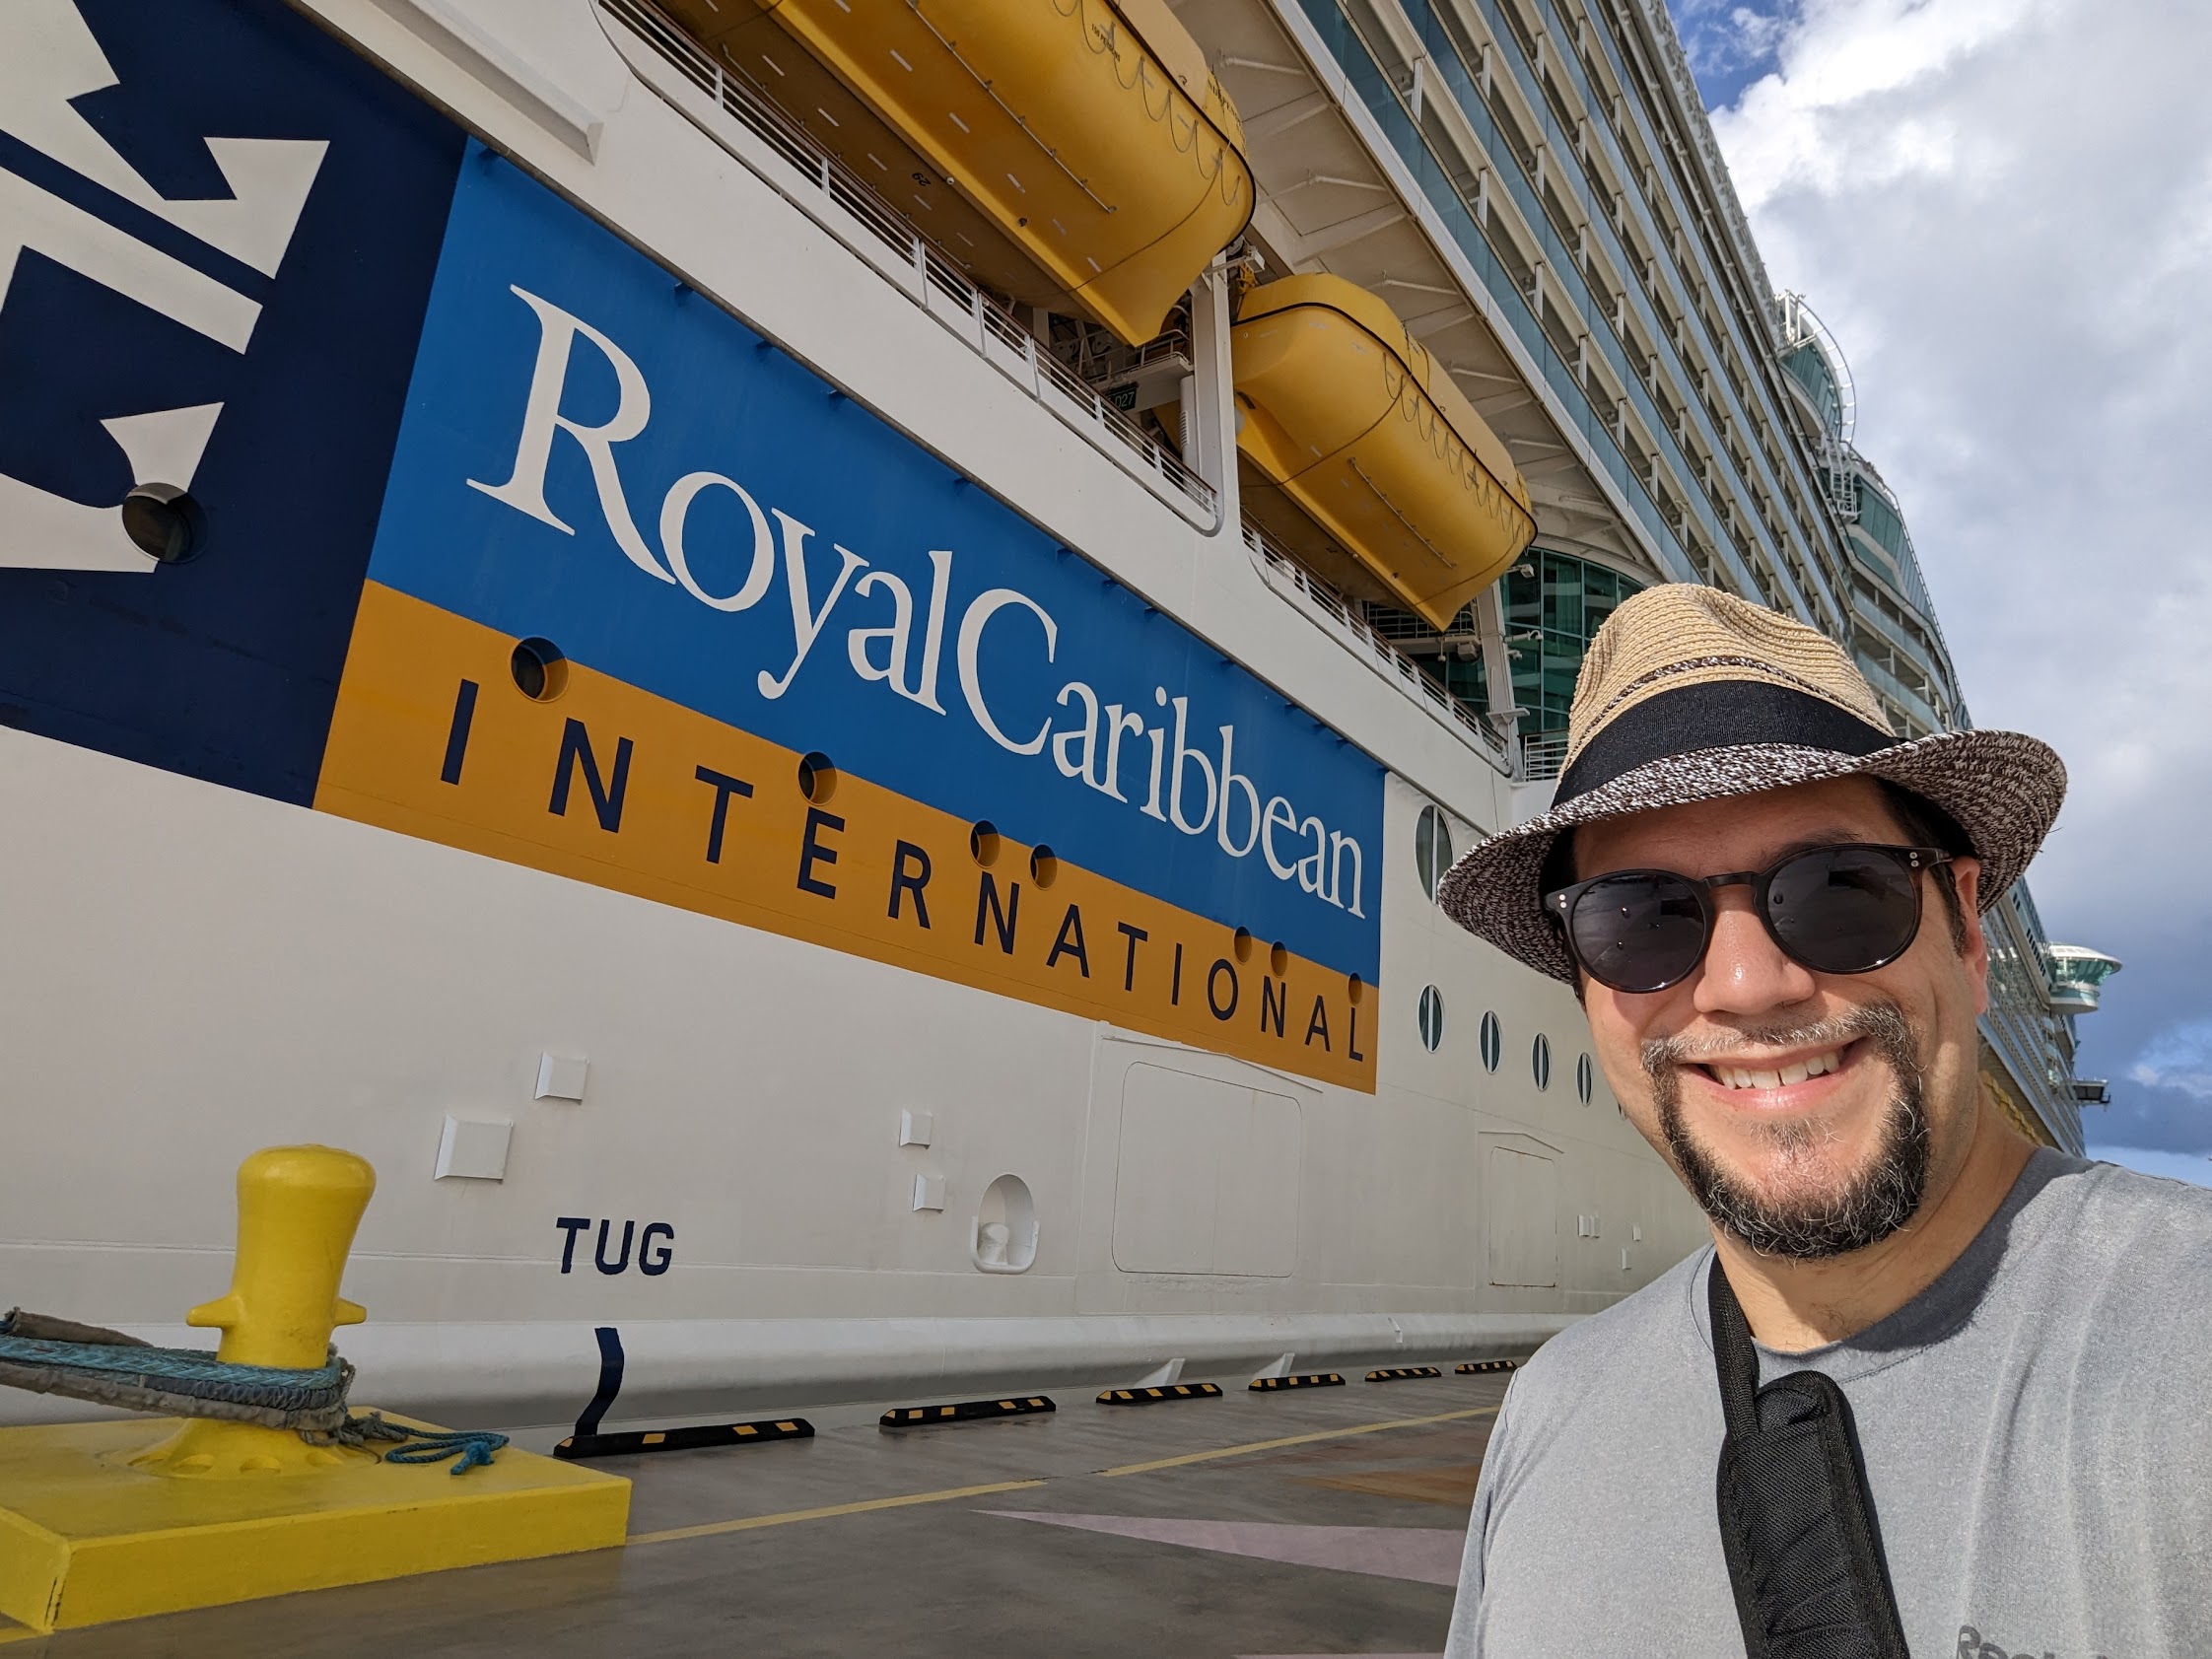 a man in a hat and sunglasses standing in front of a large cruise ship